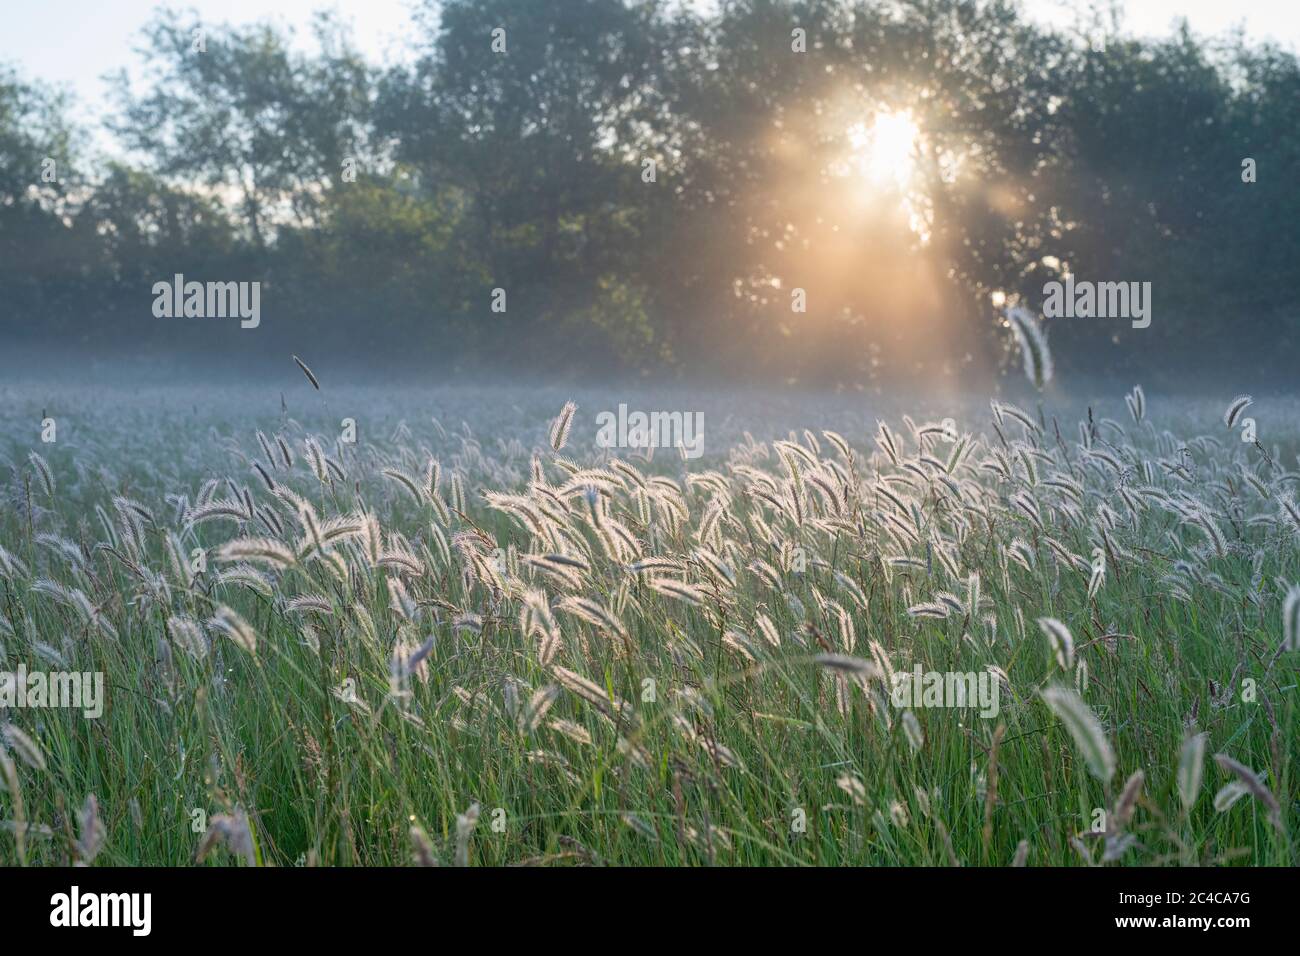 Meadow foxtail grass in the early morning sunlight. Oxfordshire, England Stock Photo